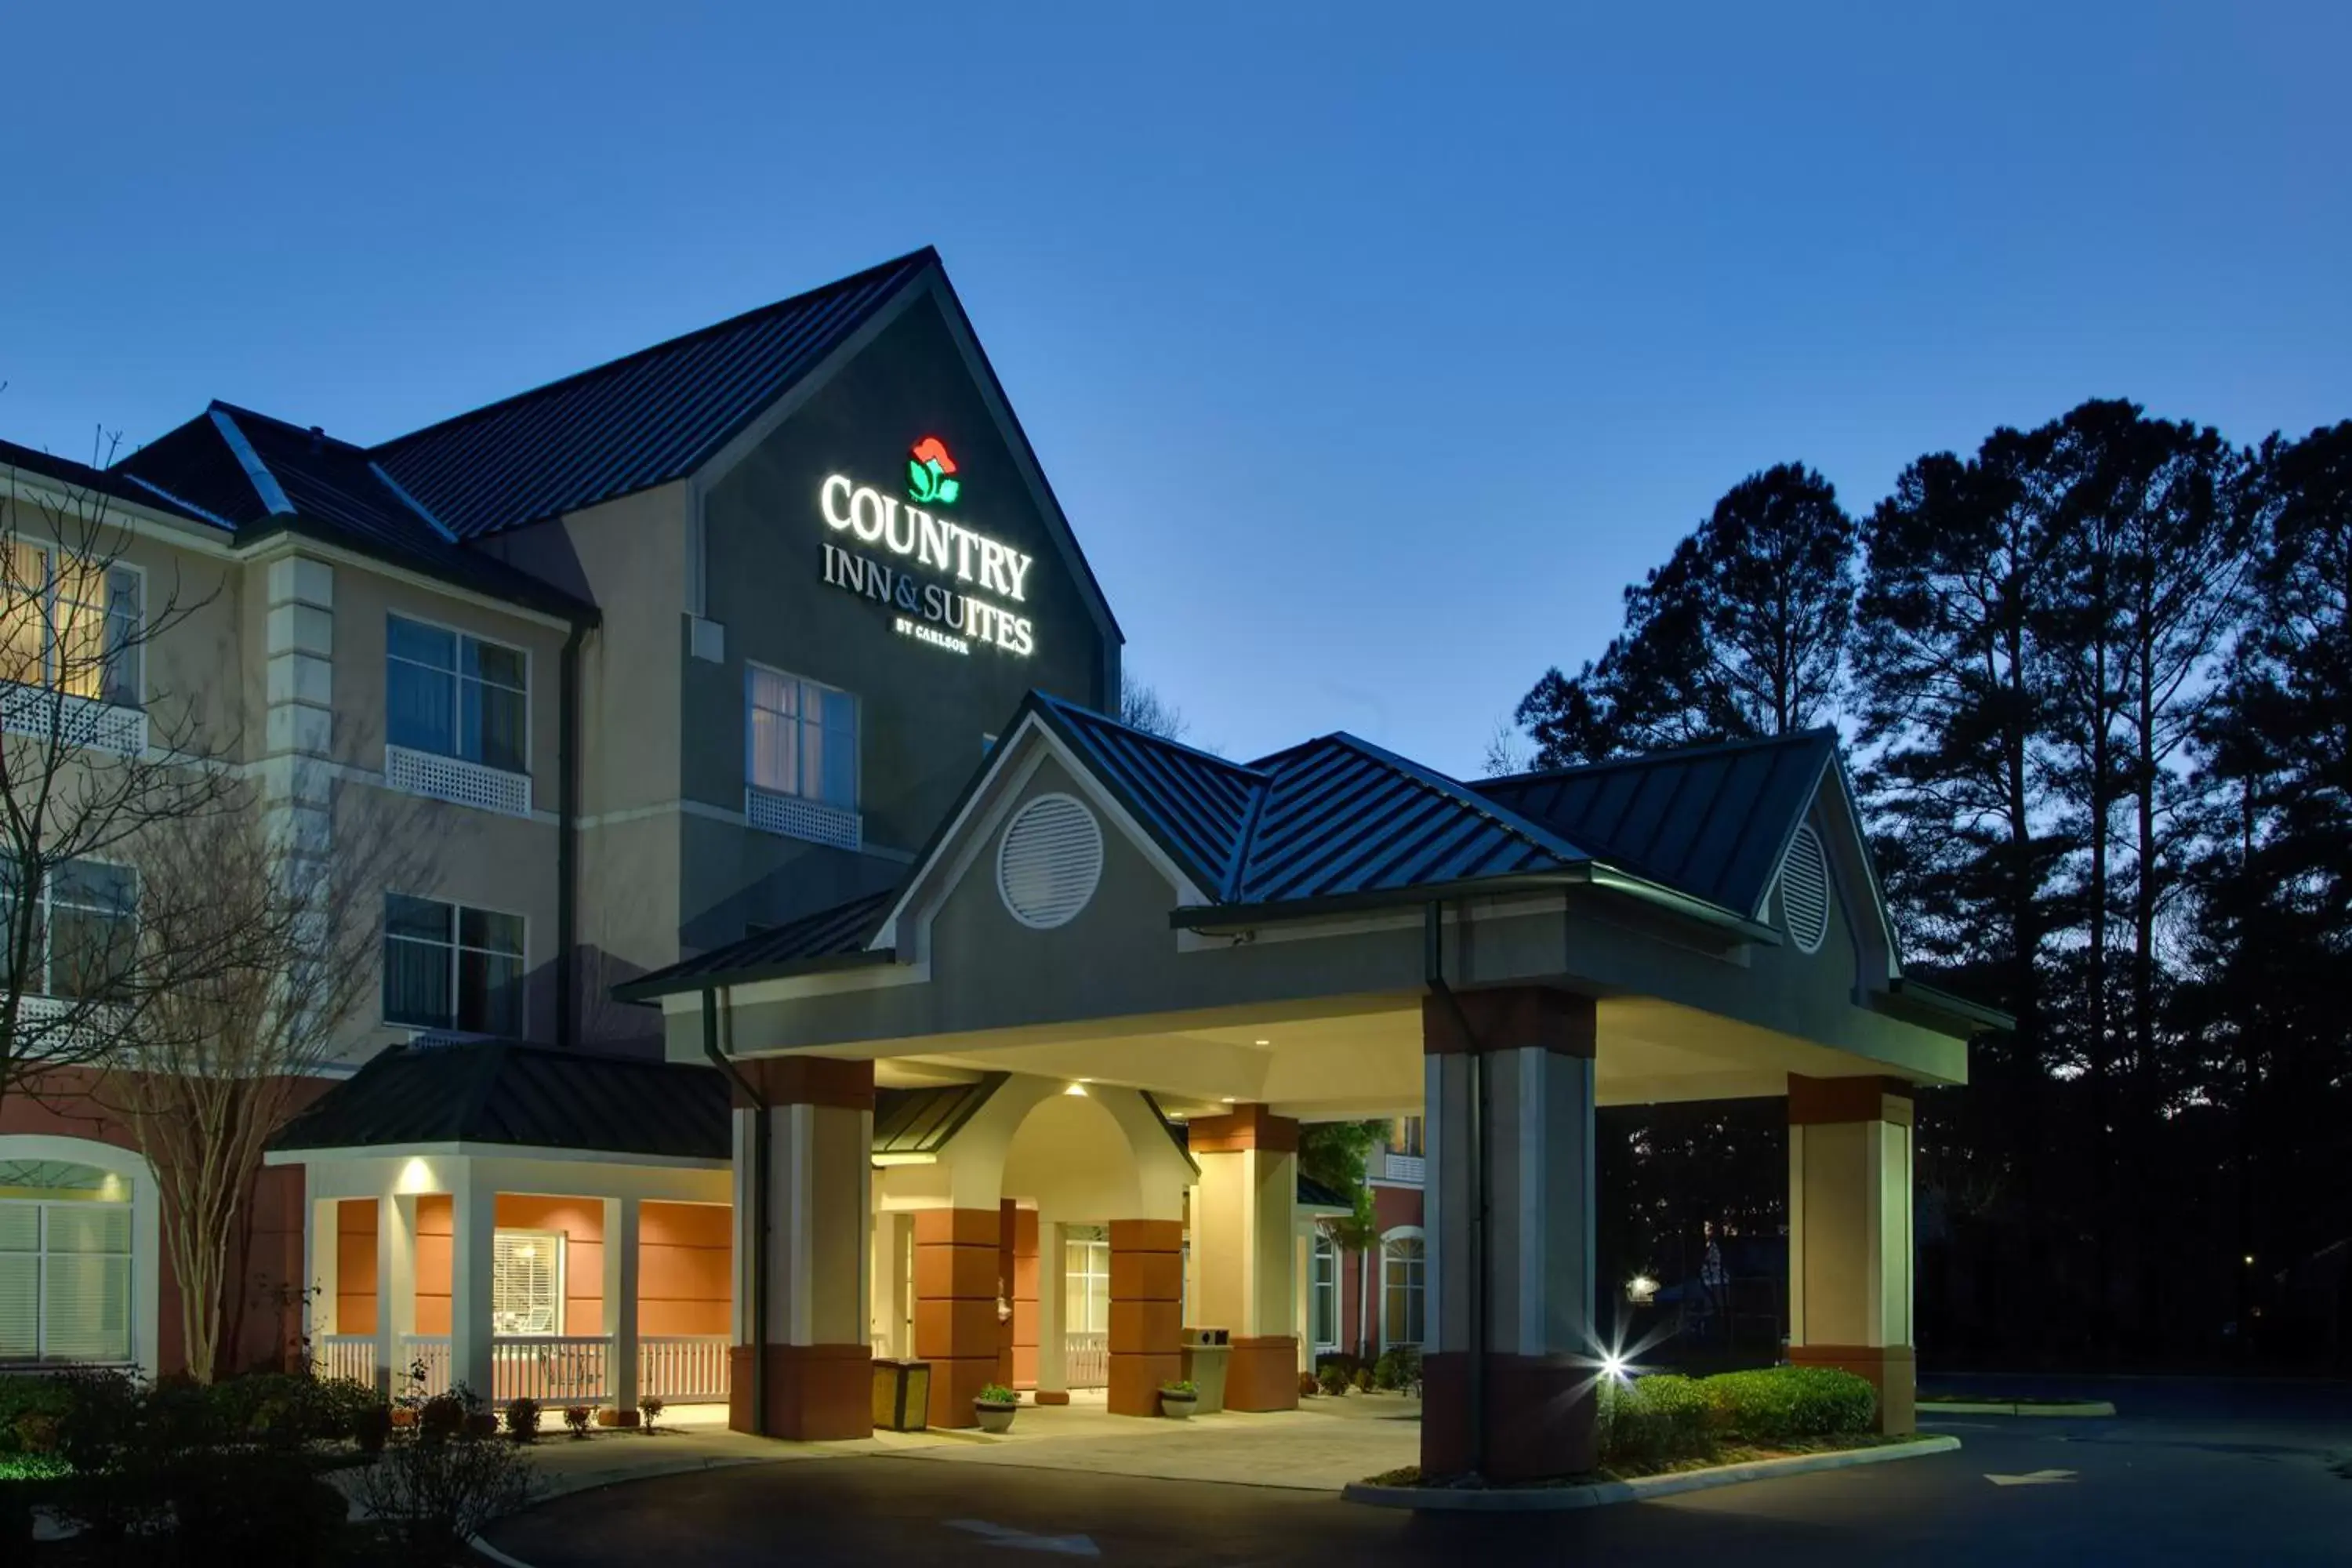 Property Building in Country Inn & Suites by Radisson, Newport News South, VA